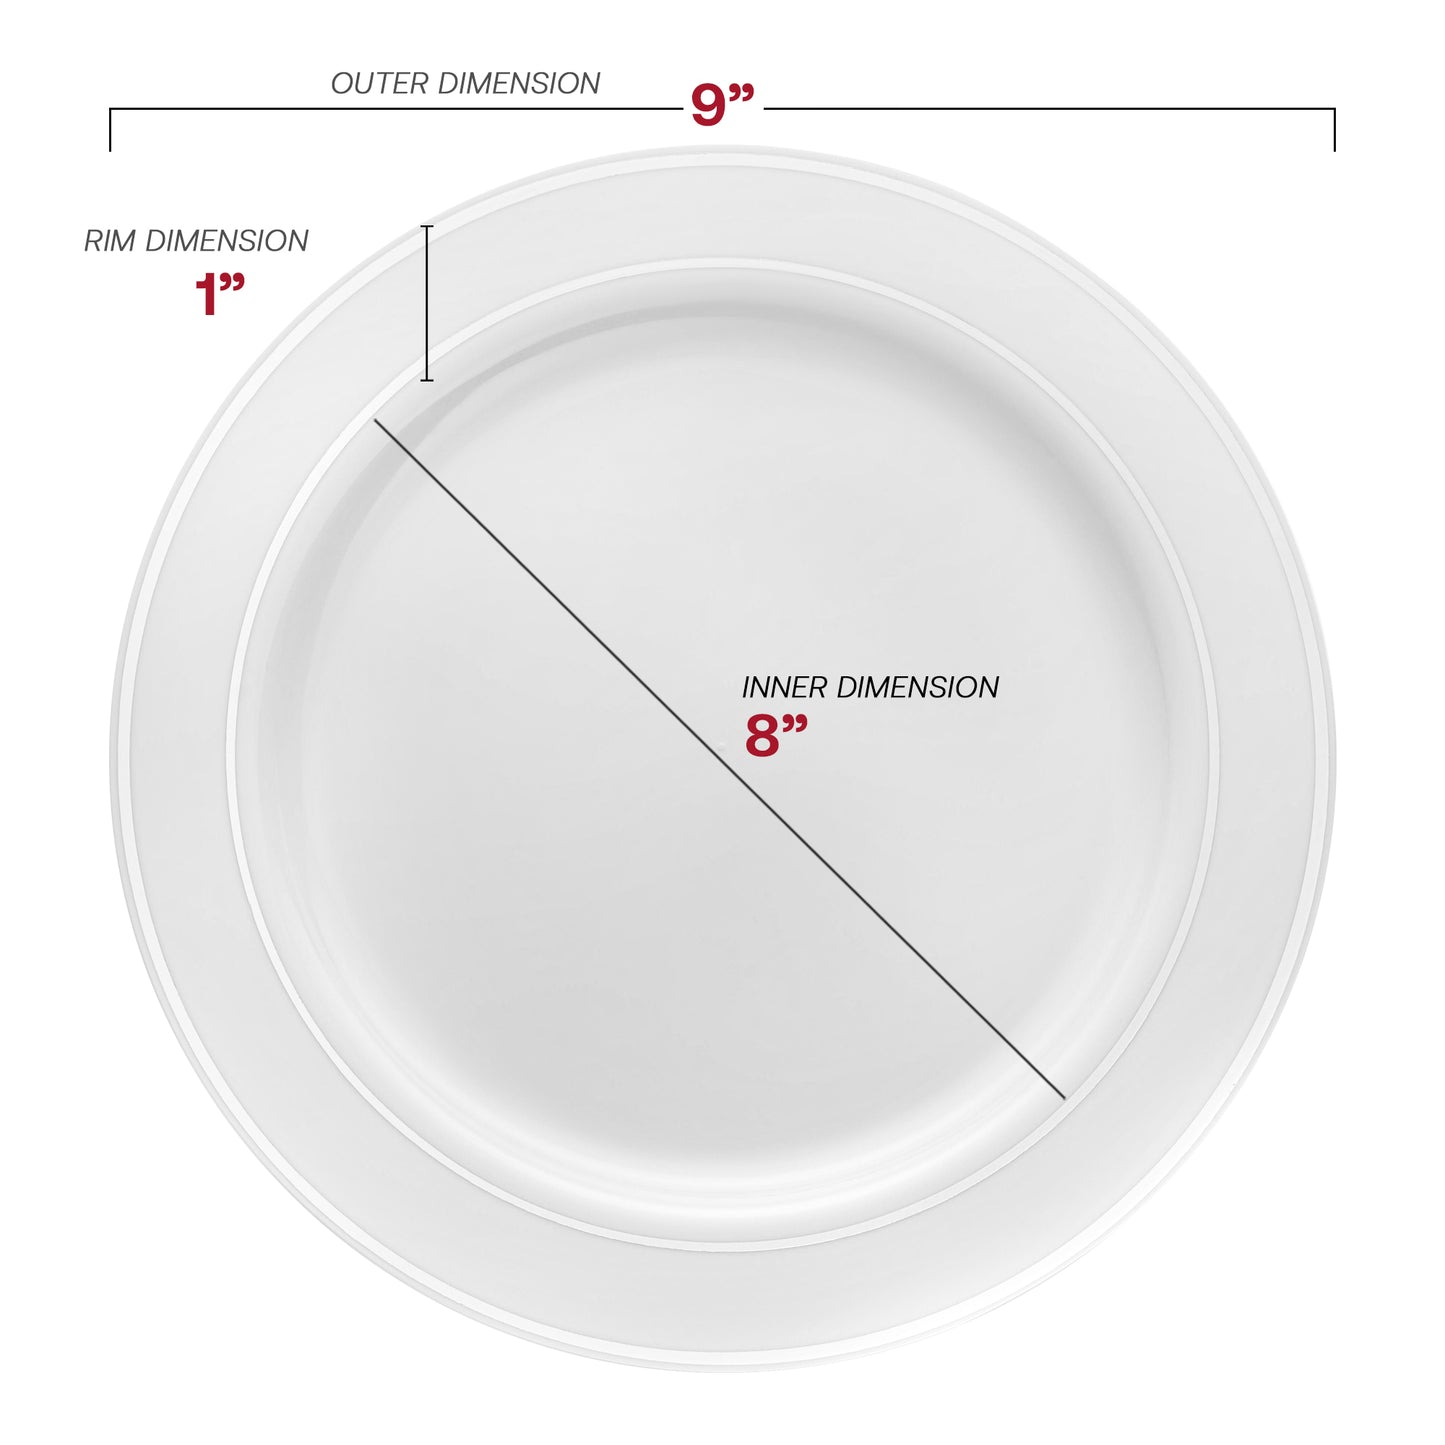 White with Silver Edge Rim Plastic Buffet Plates (9") Dimension | The Kaya Collection